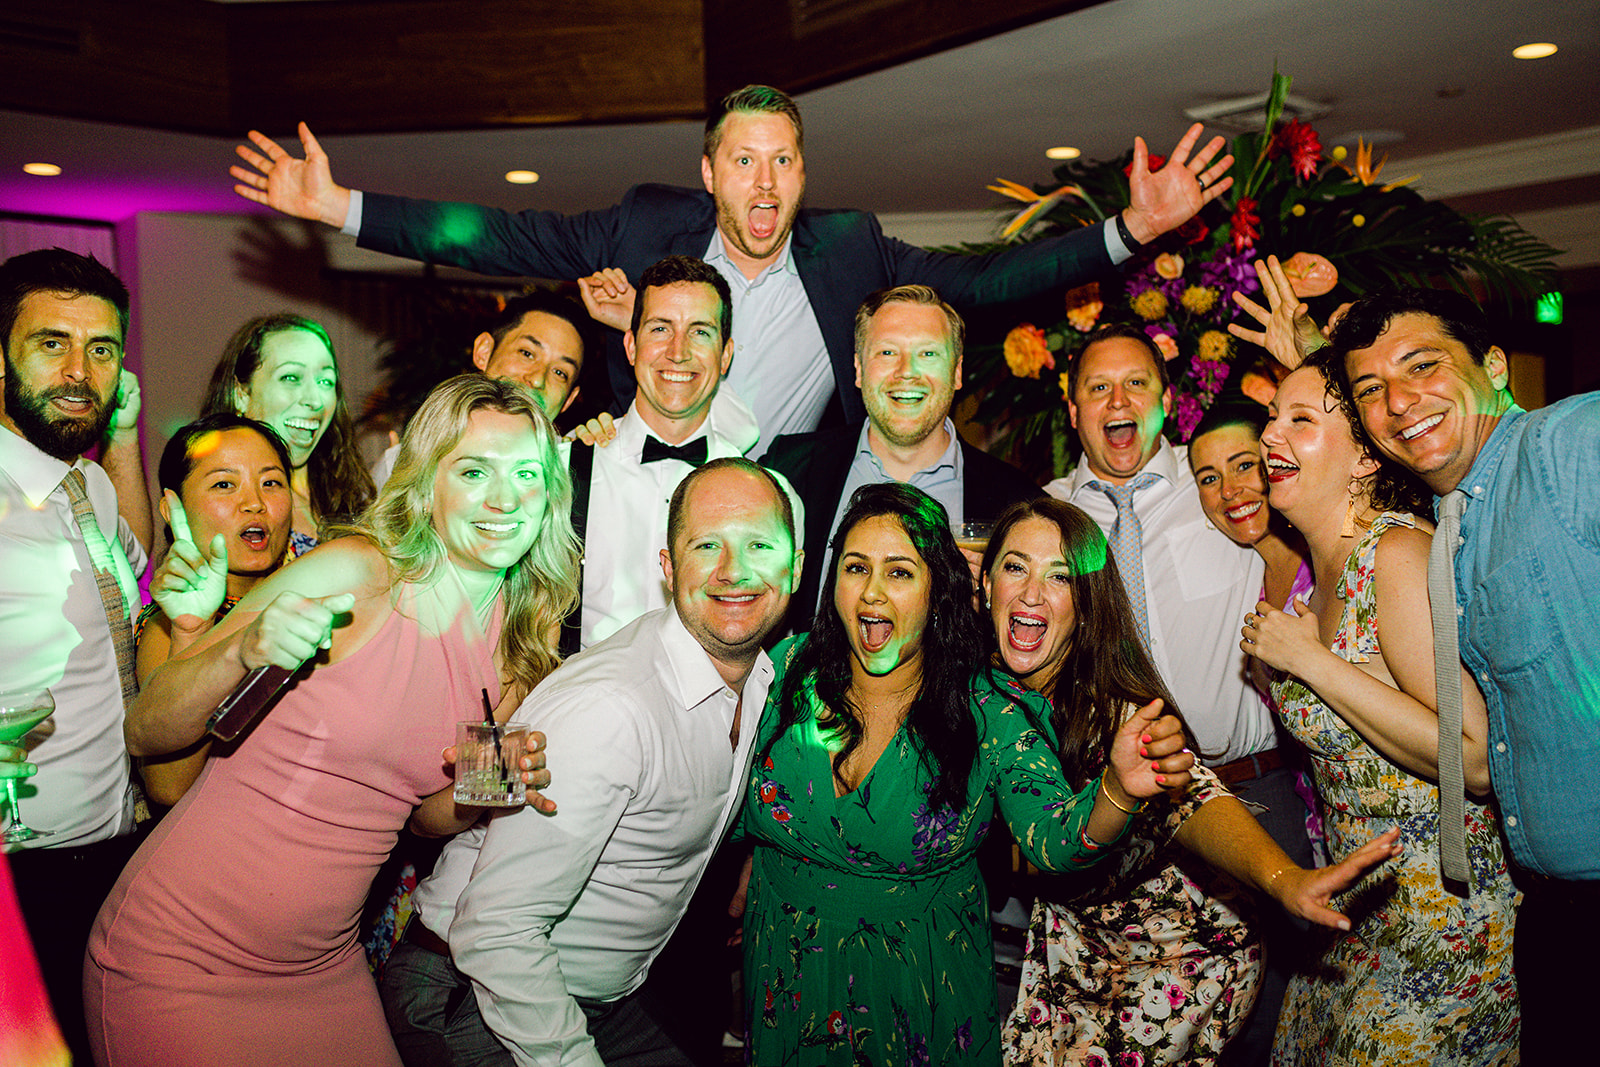 Groom with friends and colleagues pose on dance floor at wedding reception of Mayfair House Hotel & Garden, Miami.